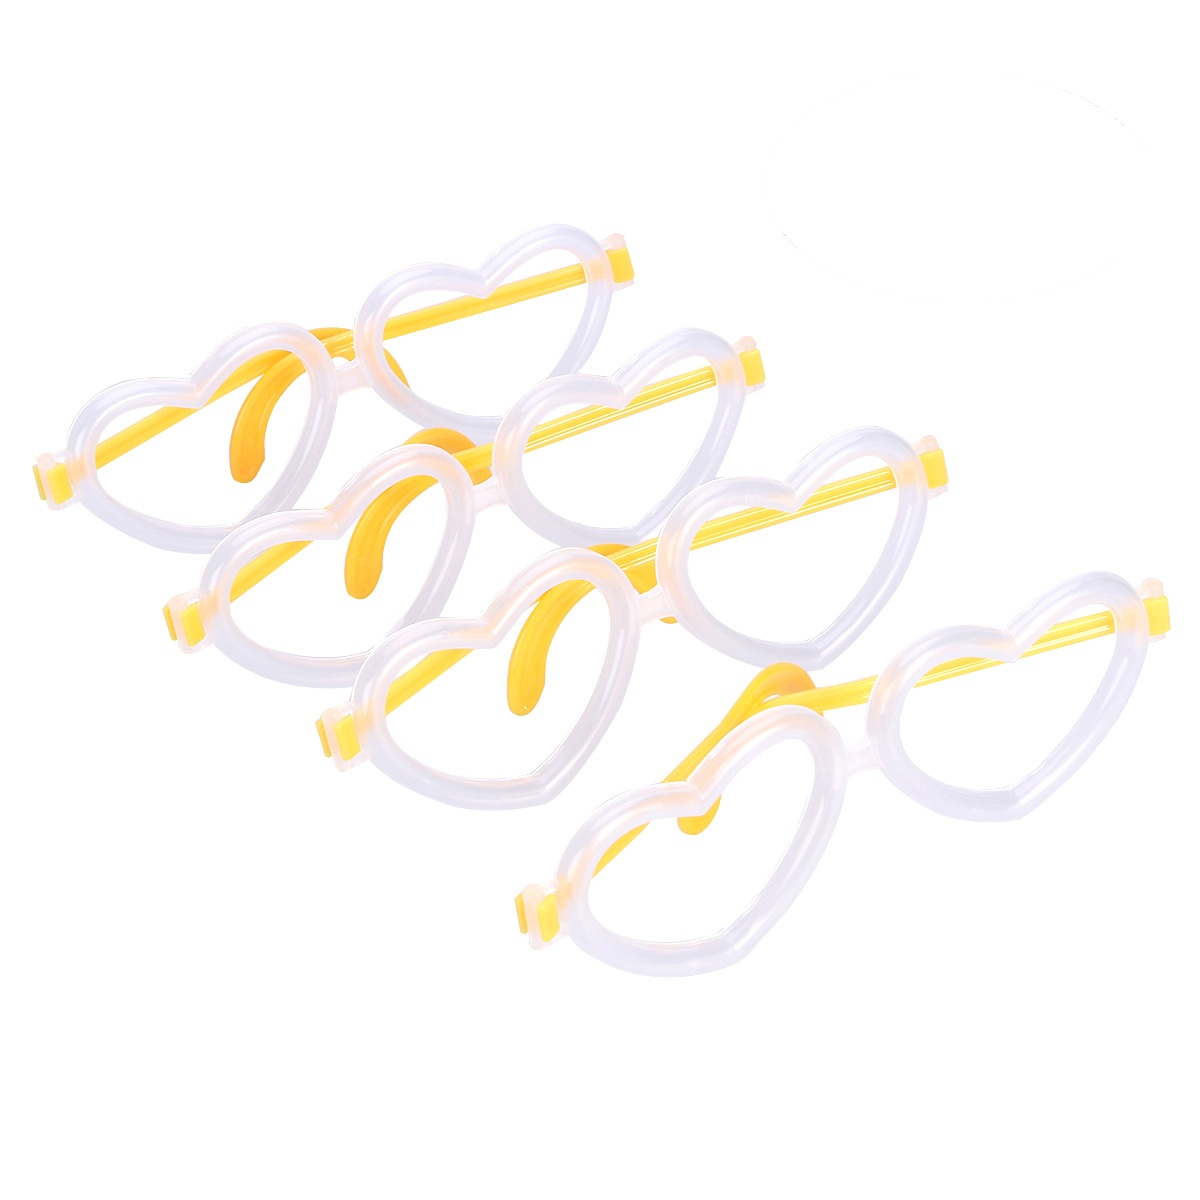 30pcs Glow Glasses Light Up Toy Party Favors Heart-shaped Eyeglasses Glow Sticks Party Supplies Accessories - image 1 of 6